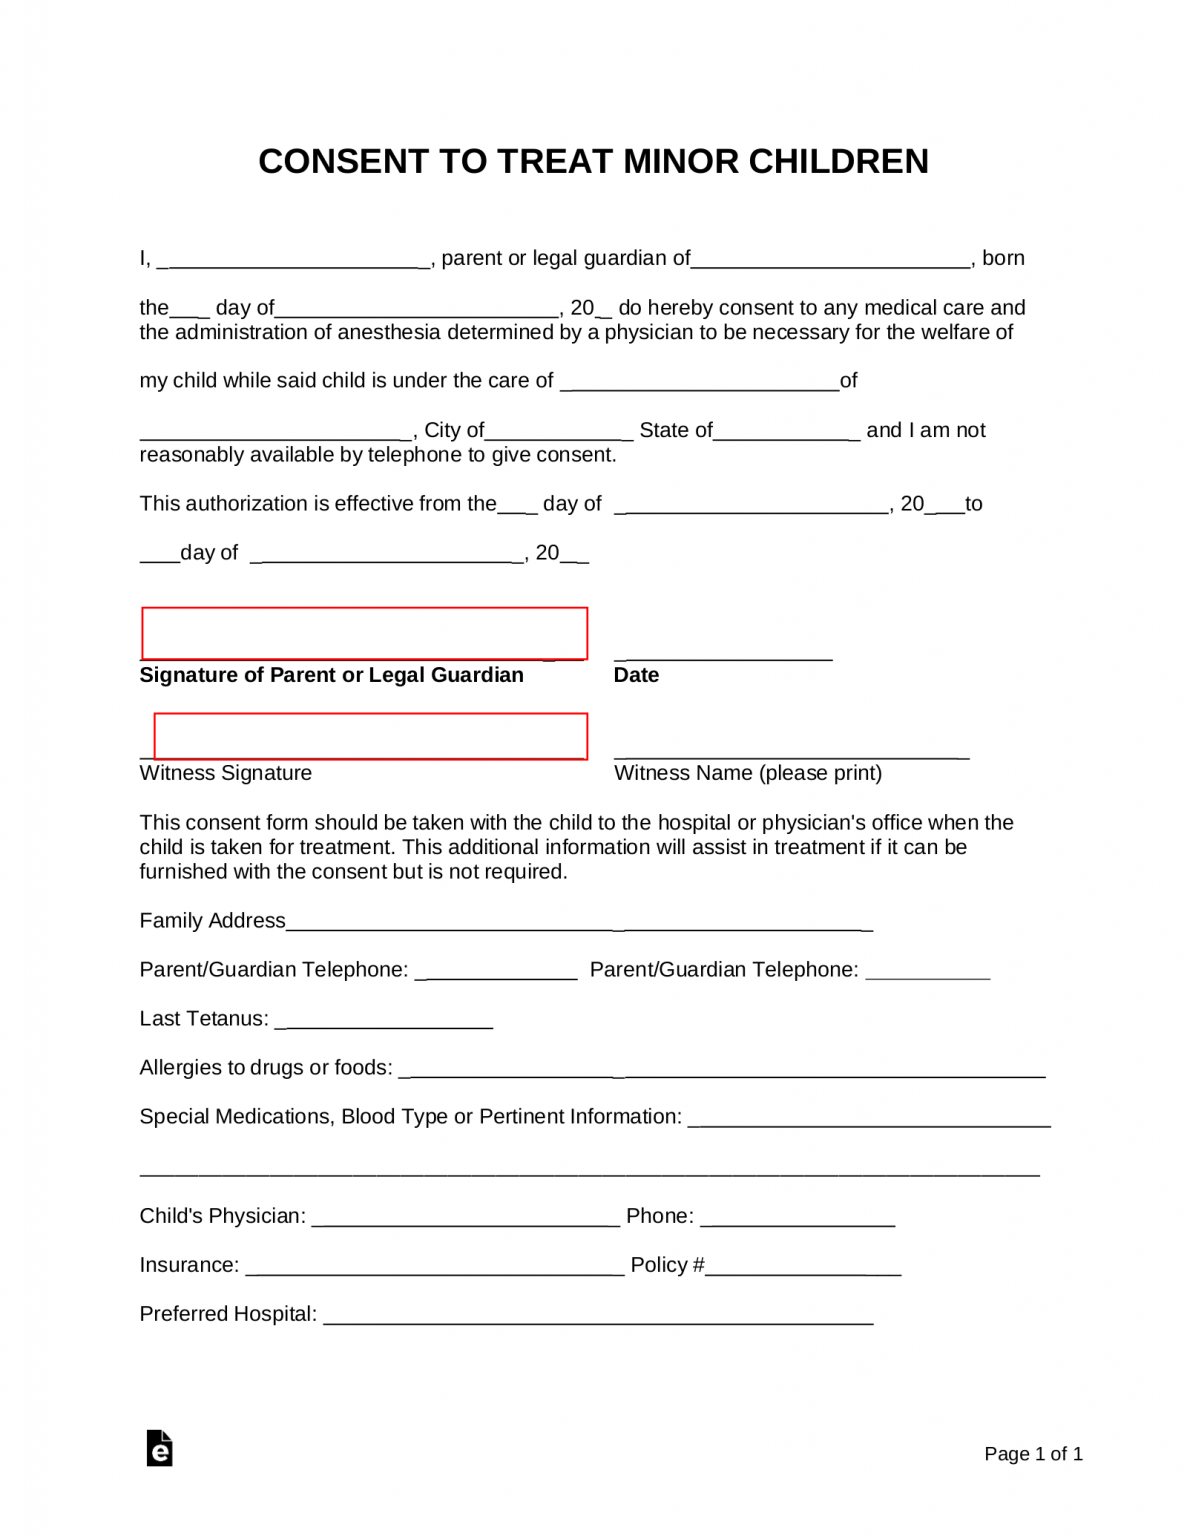 notarized travel consent form for minor